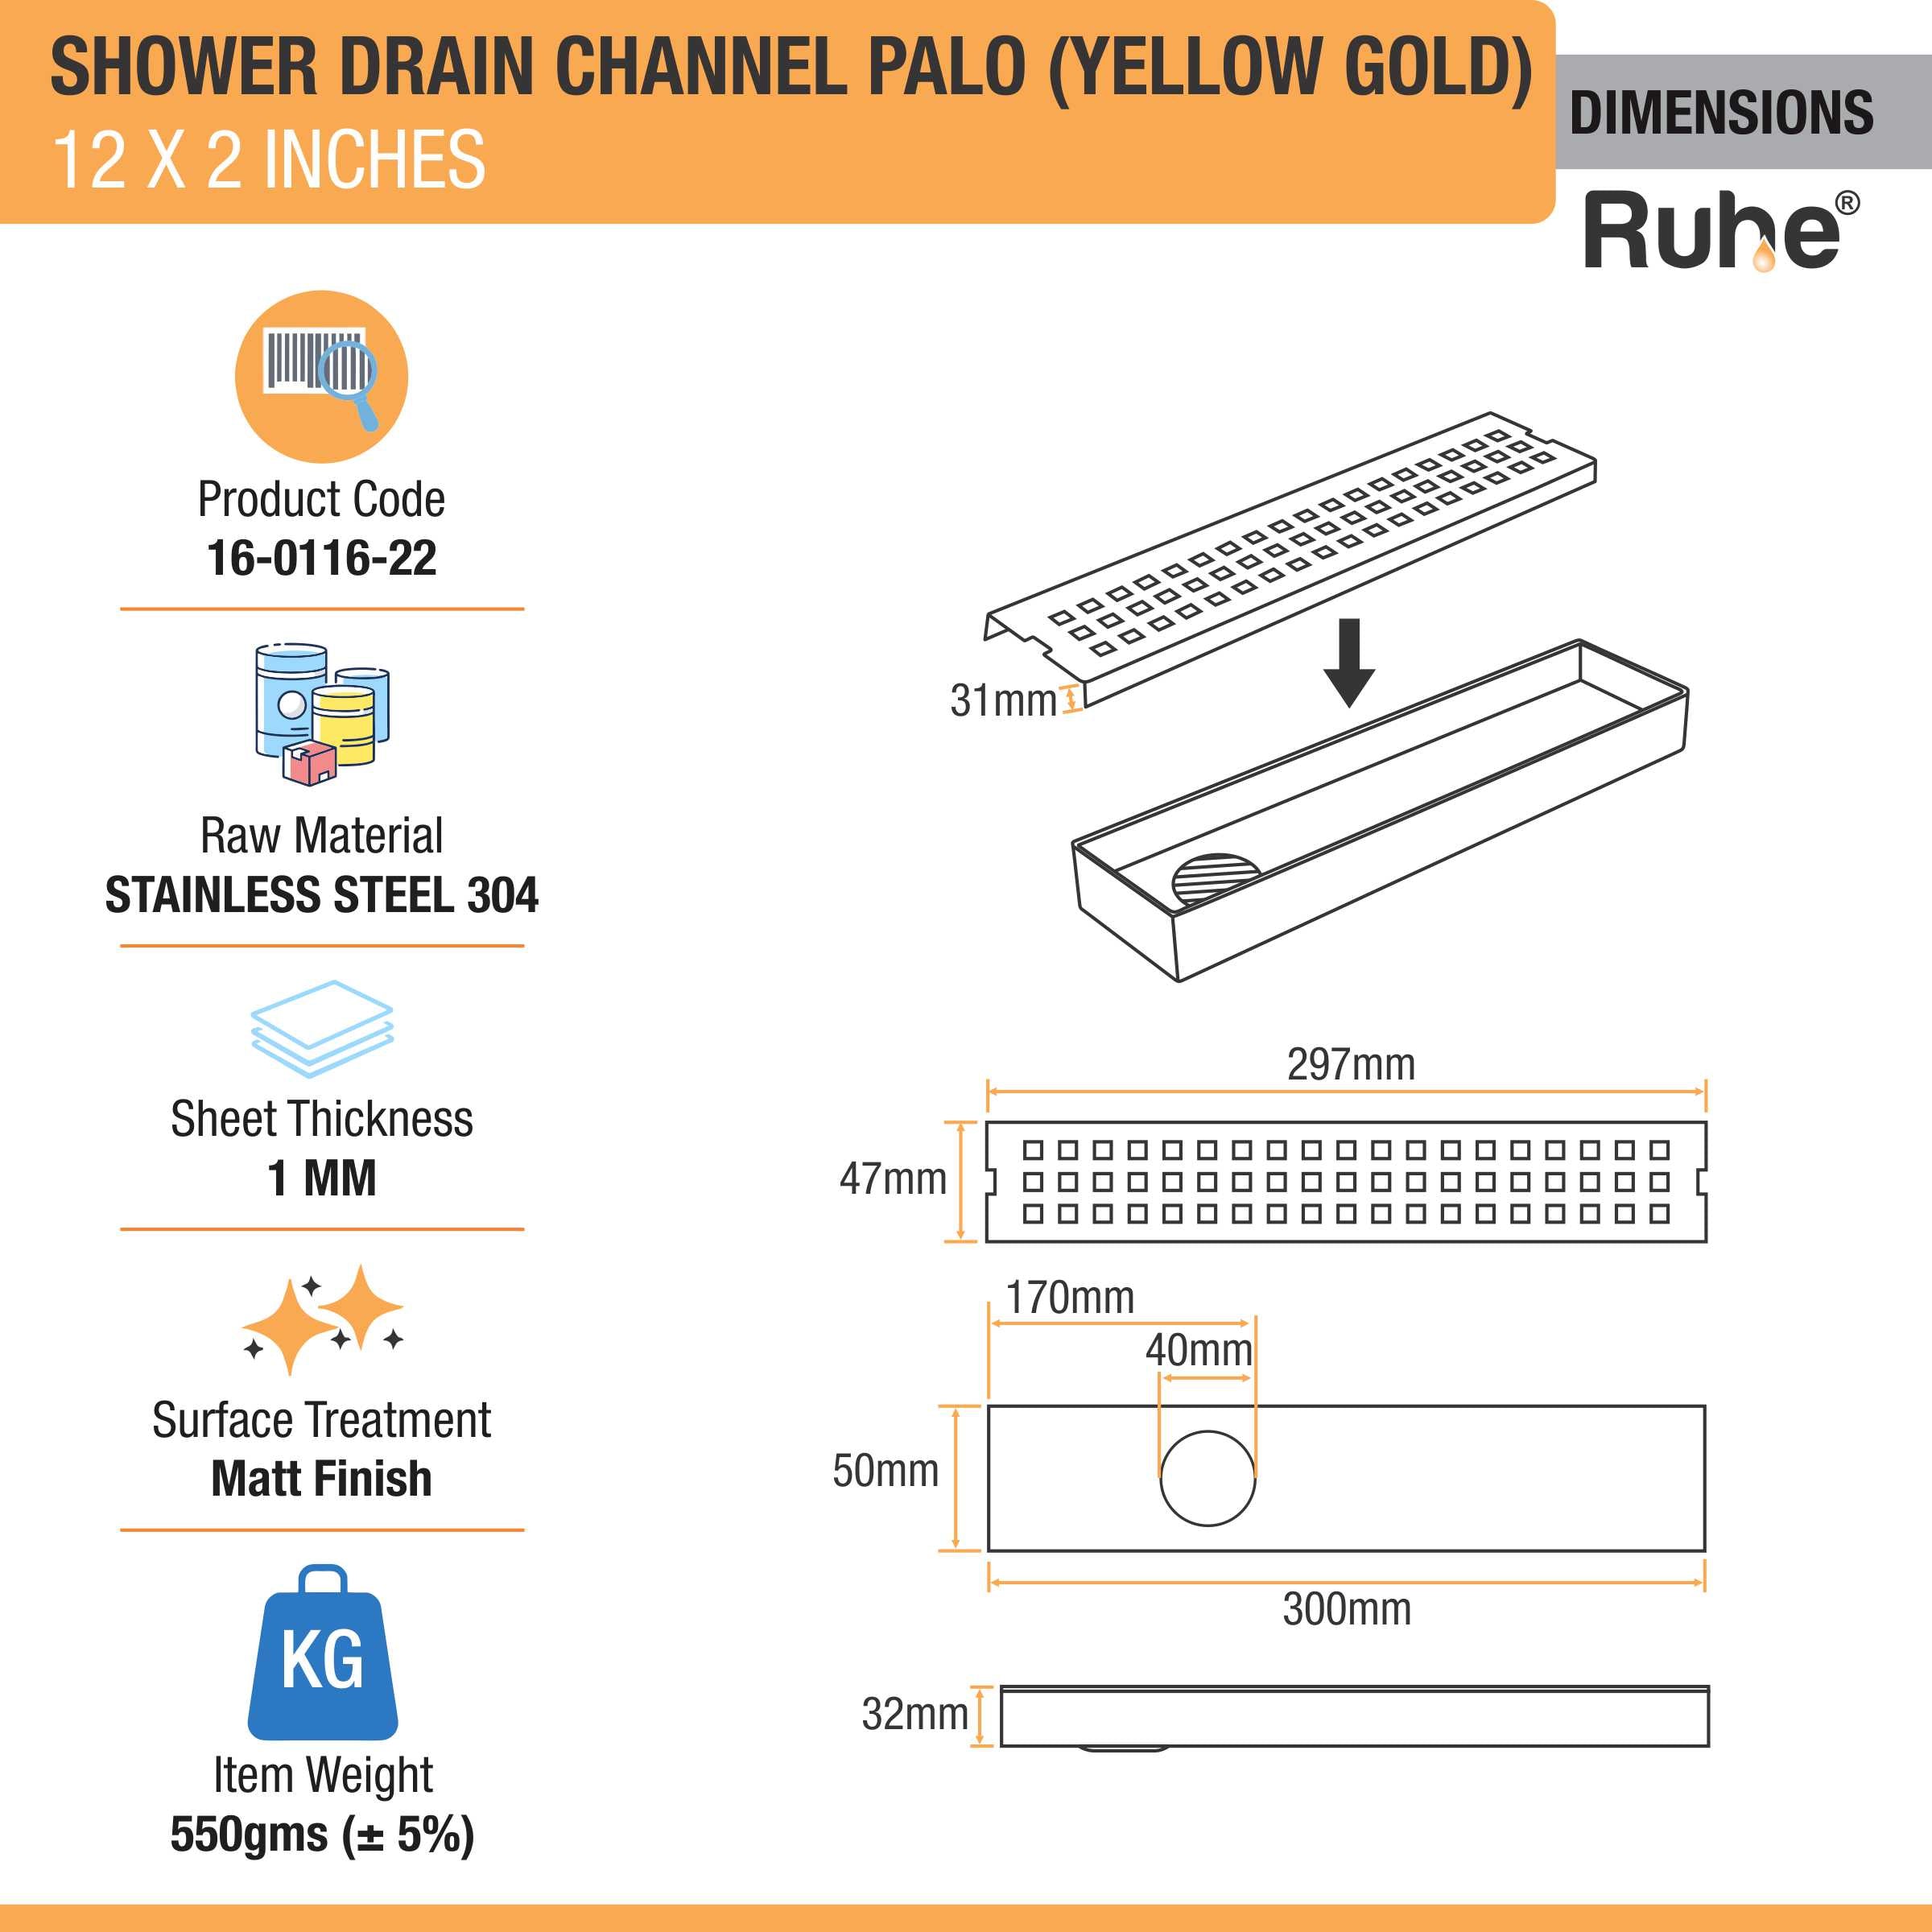 Palo Shower Drain Channel (12 x 2 Inches) YELLOW GOLD dimensions and size